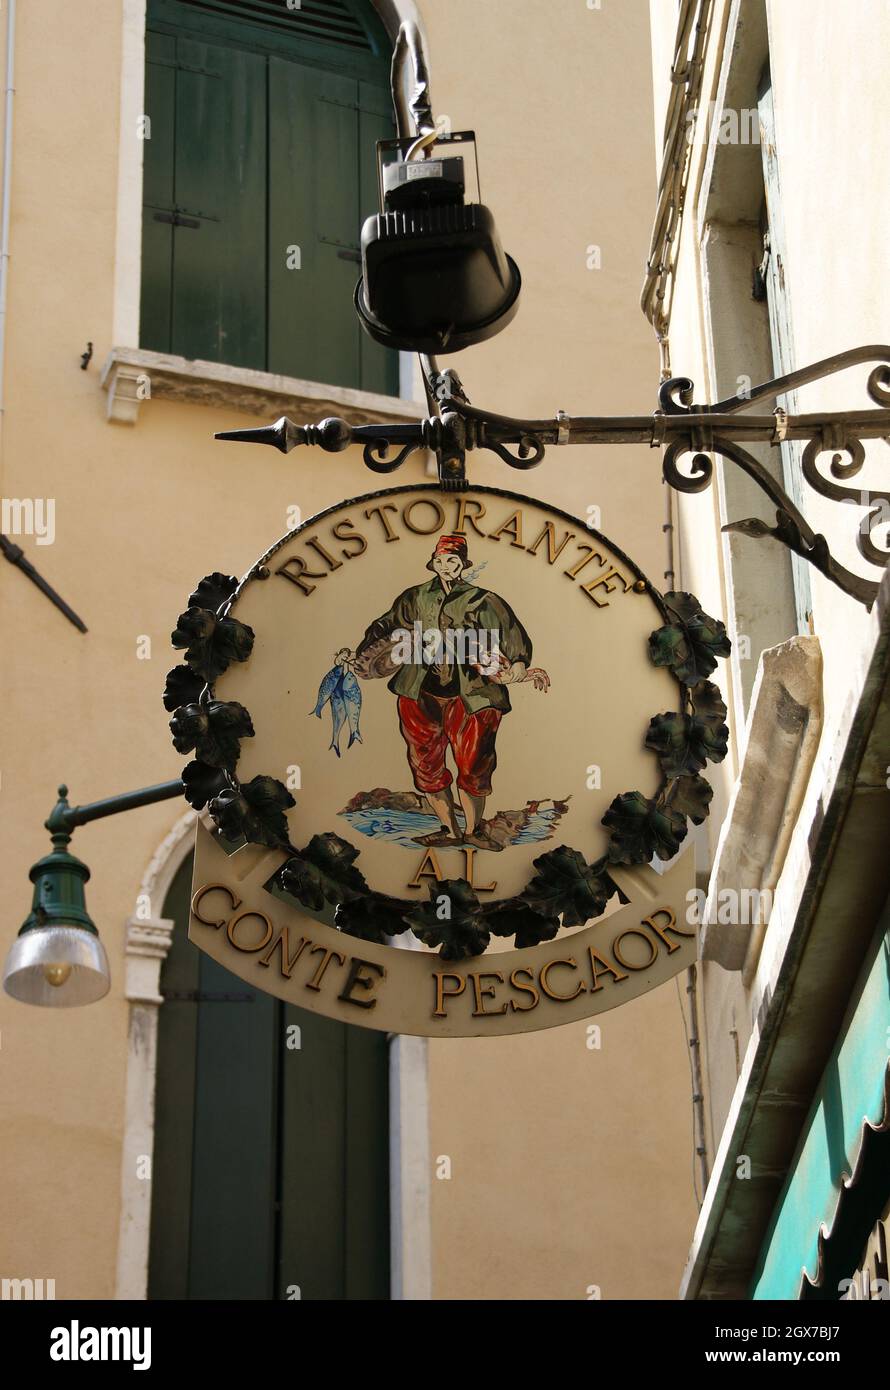 VENICE, ITALY - Aug 01, 2011: A vertical shot of a vintage restaurant sign in Venice, Italy Stock Photo